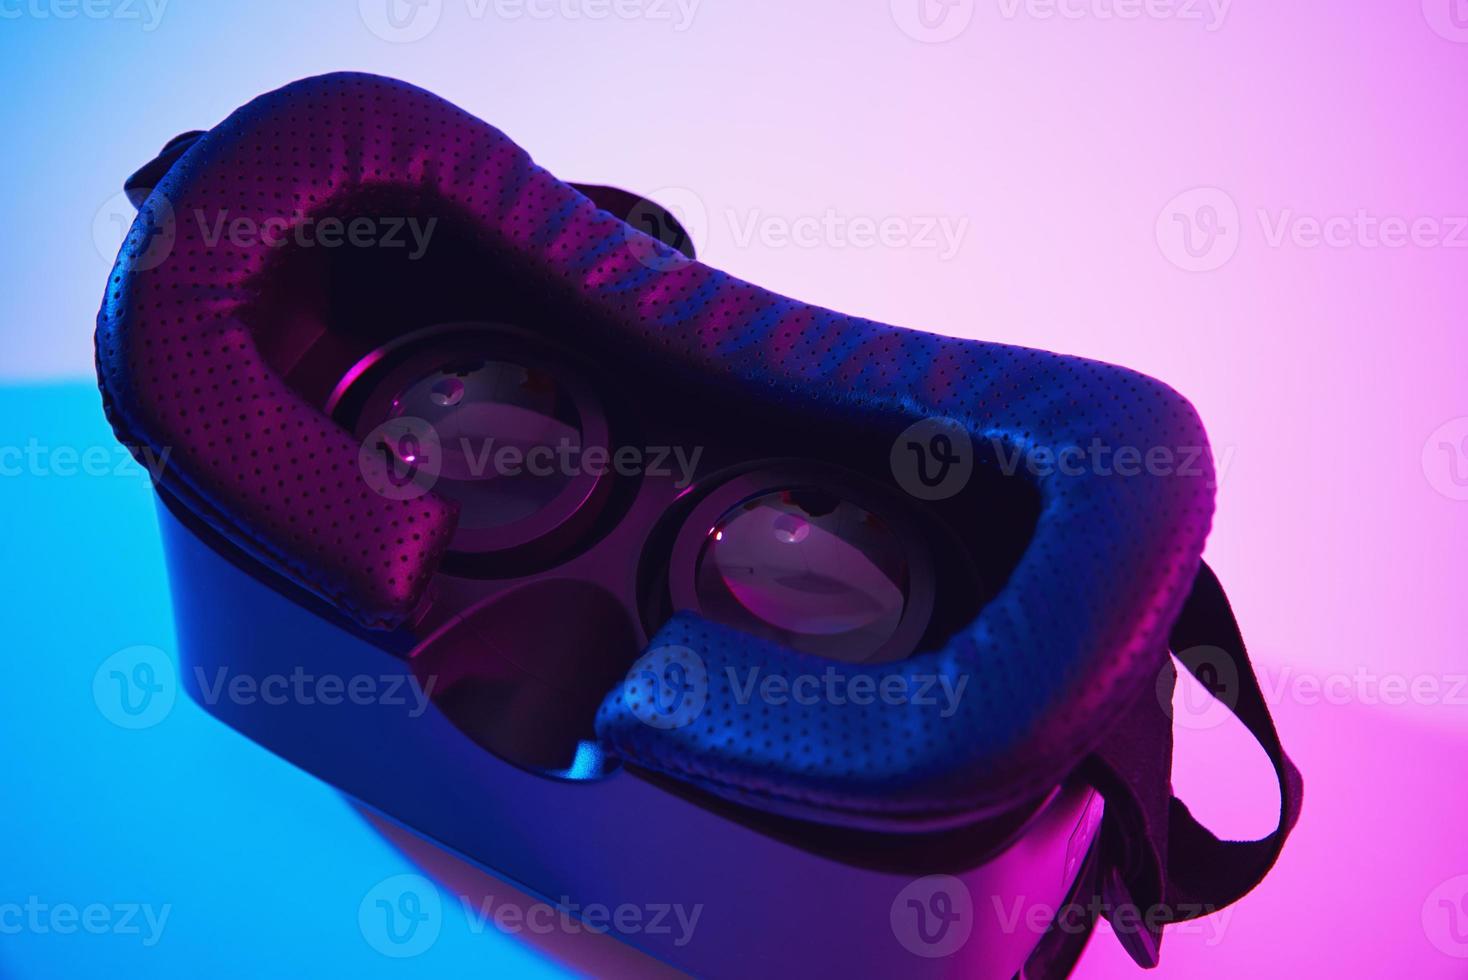 Virtual reality glasses on colorful background. Future technology, VR concept photo